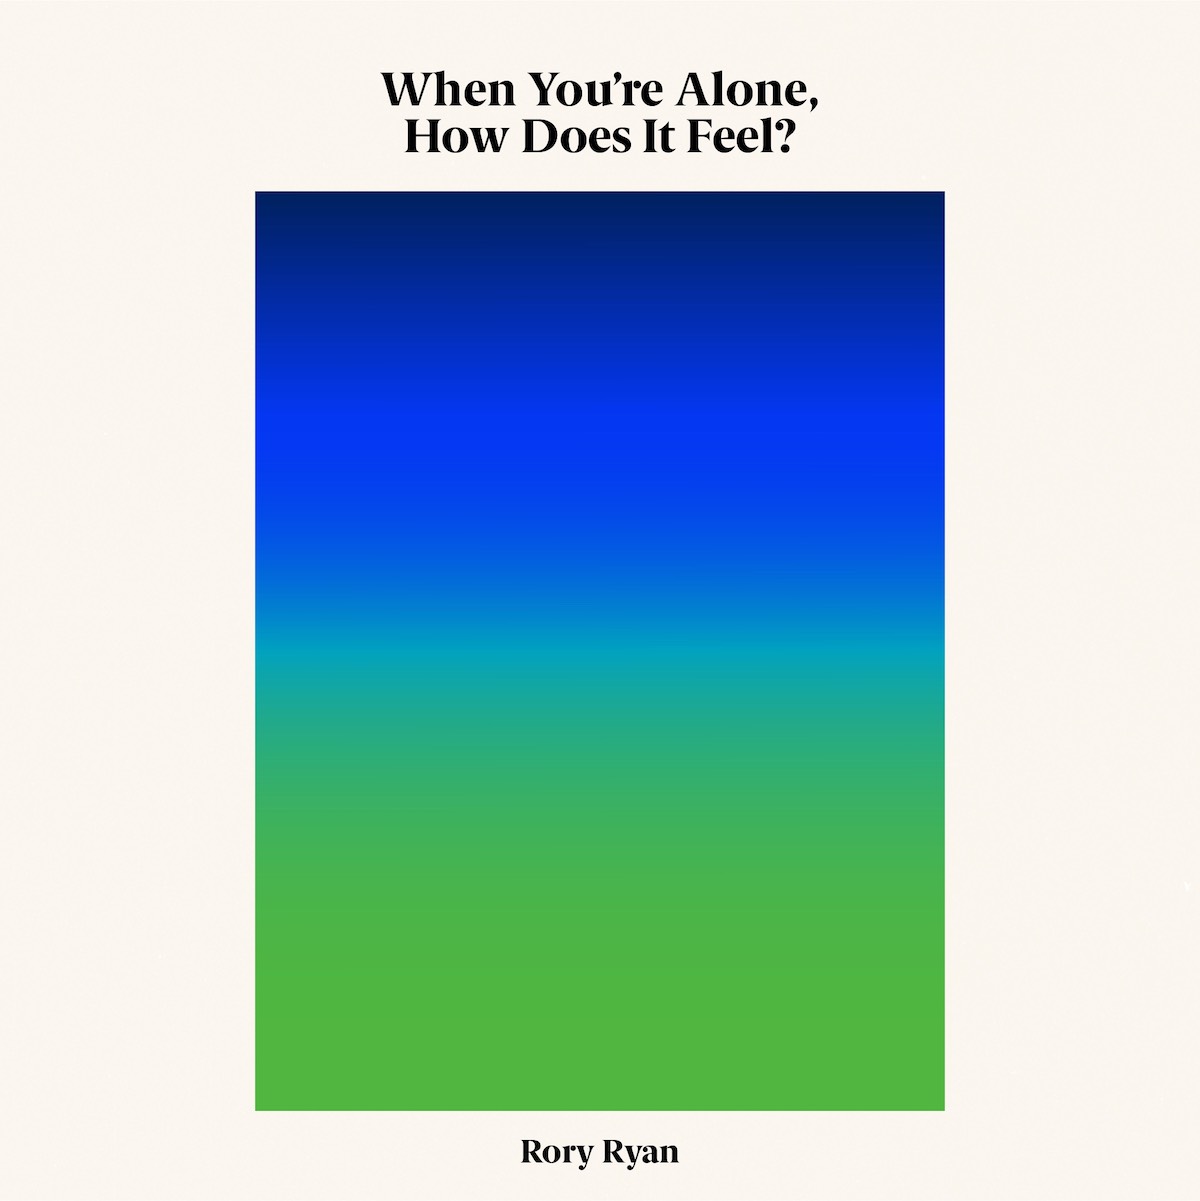 DEBUT ALBUM REVIEW: When You’re Alone, How Does It Feel? by Rory Ryan